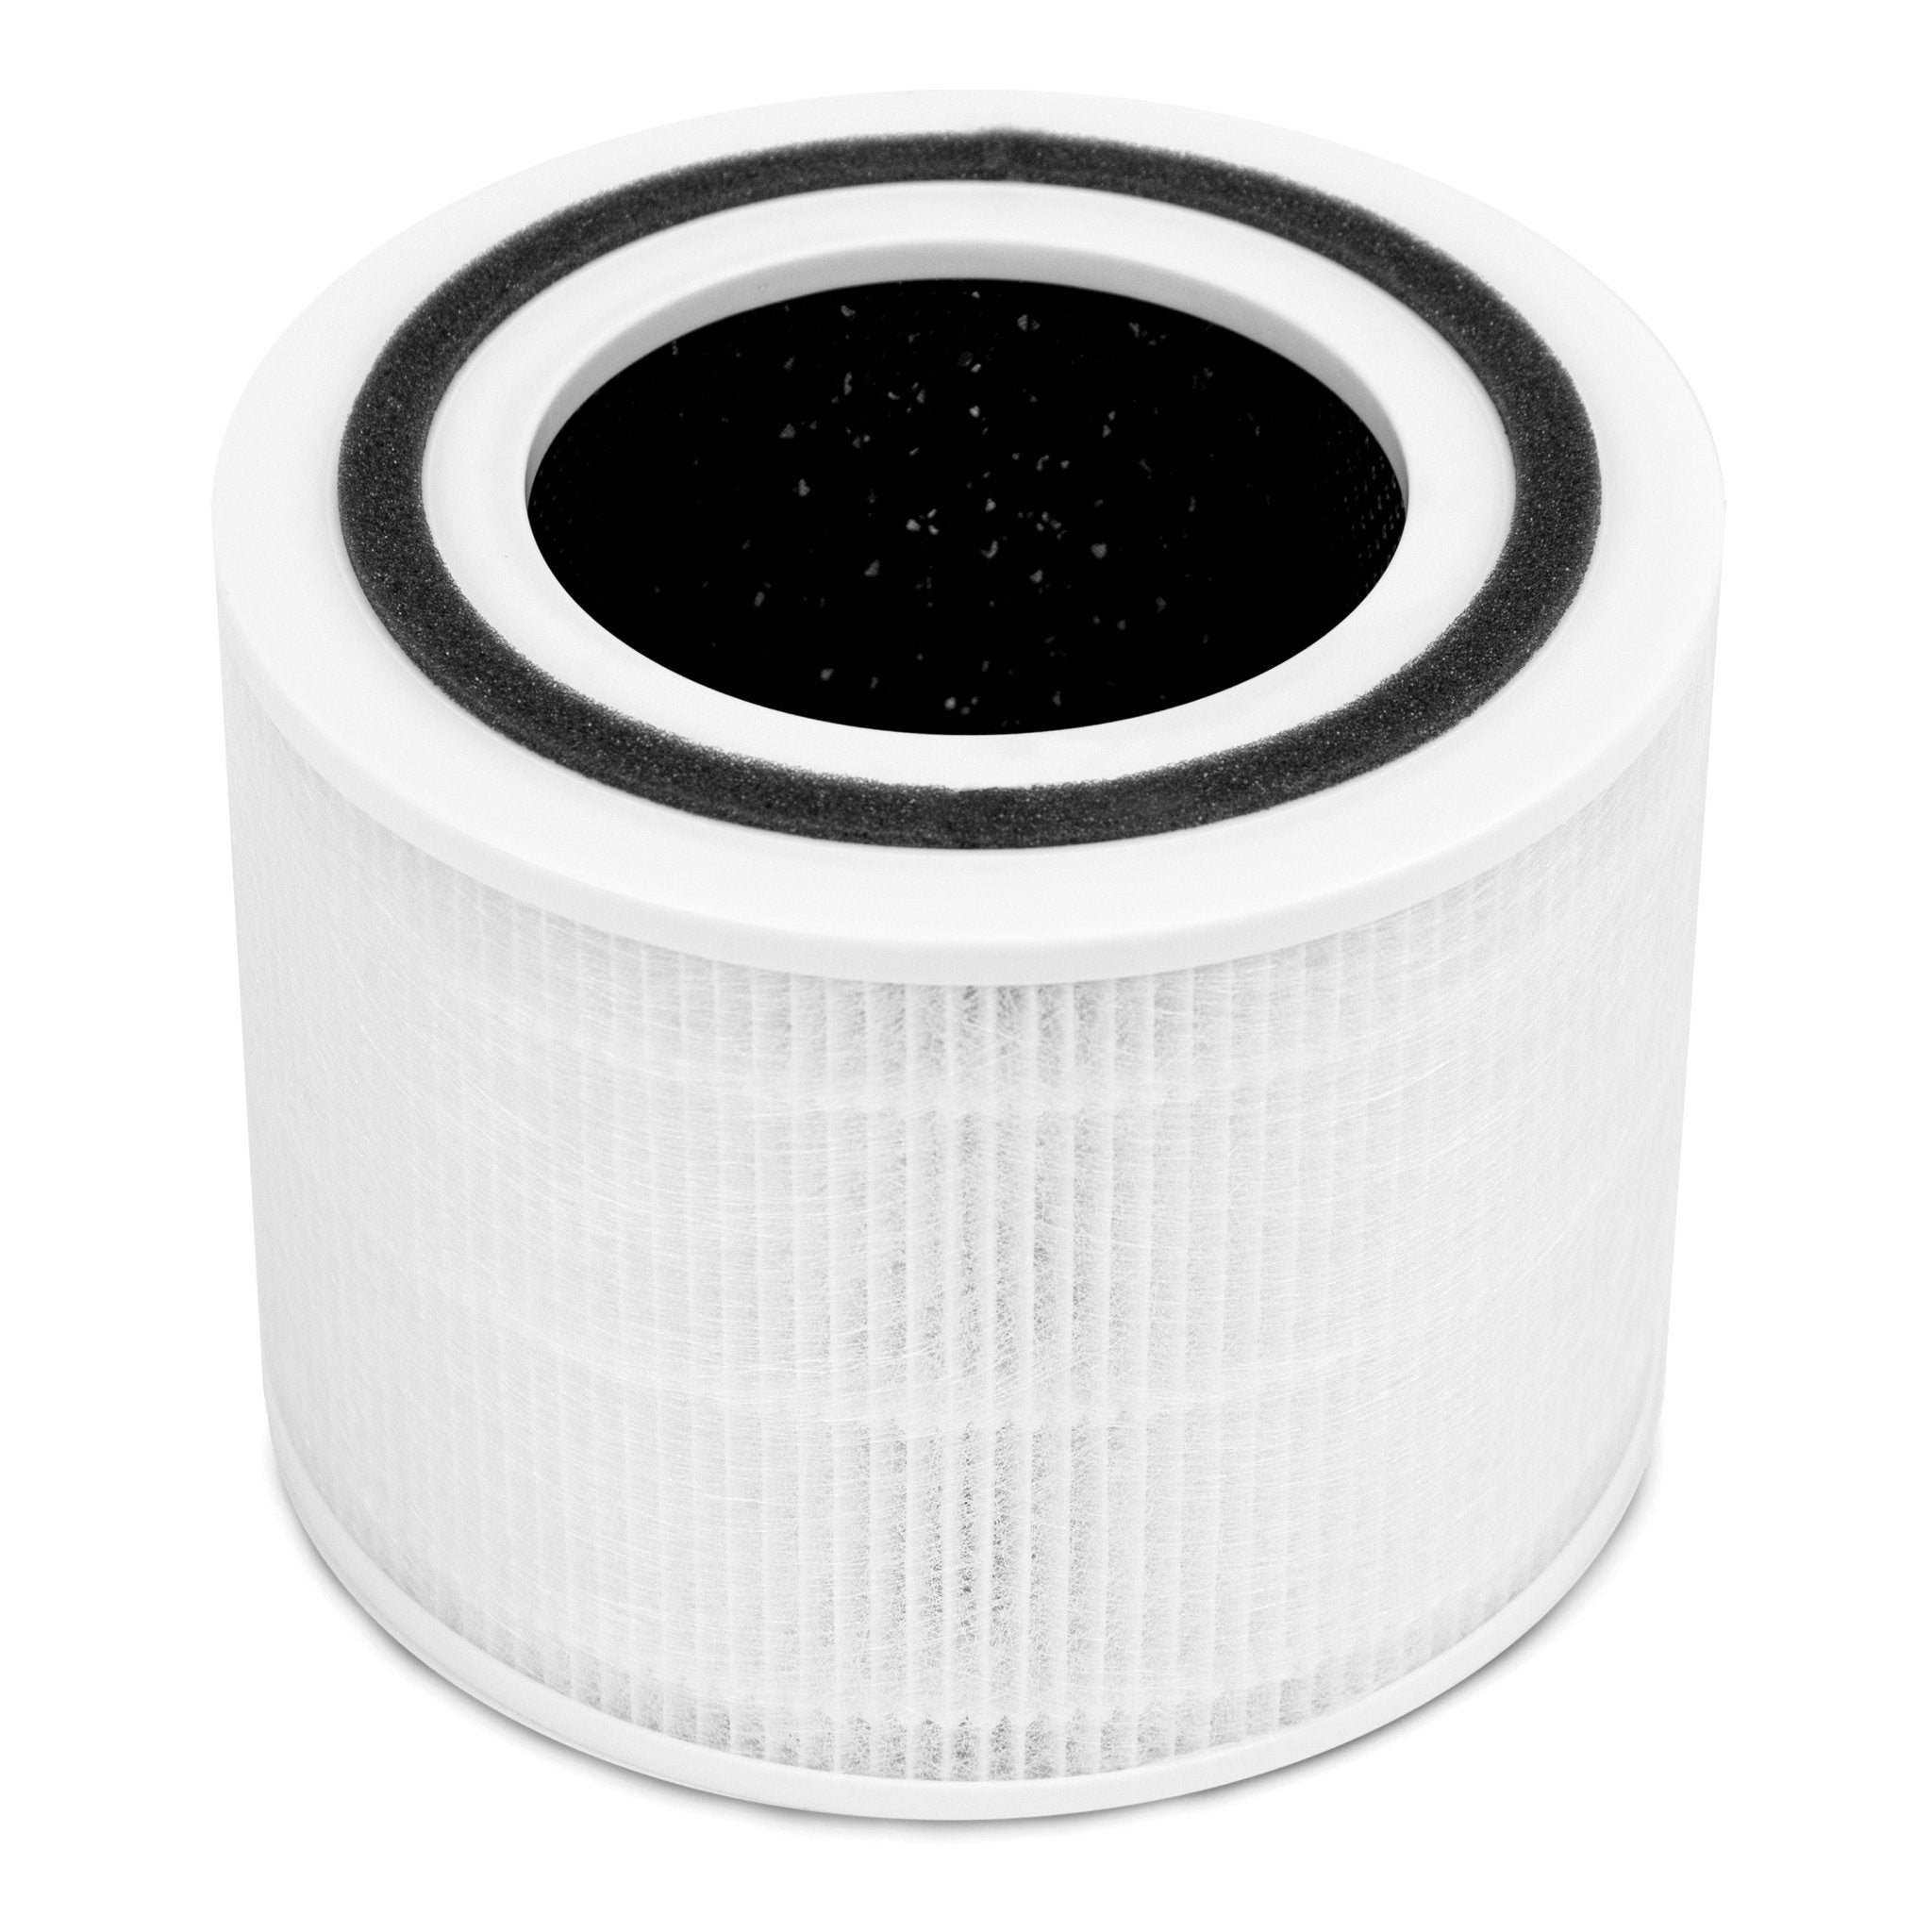  Keedal Core 300 Replacement Filter [Pet Care] Compatible with LEVOIT  Core 300 Filter and Air Purifier Core 300S P350, 3-Stage H13 True HEPA  Filter, Part# Core 300-RF 300-RF-PA